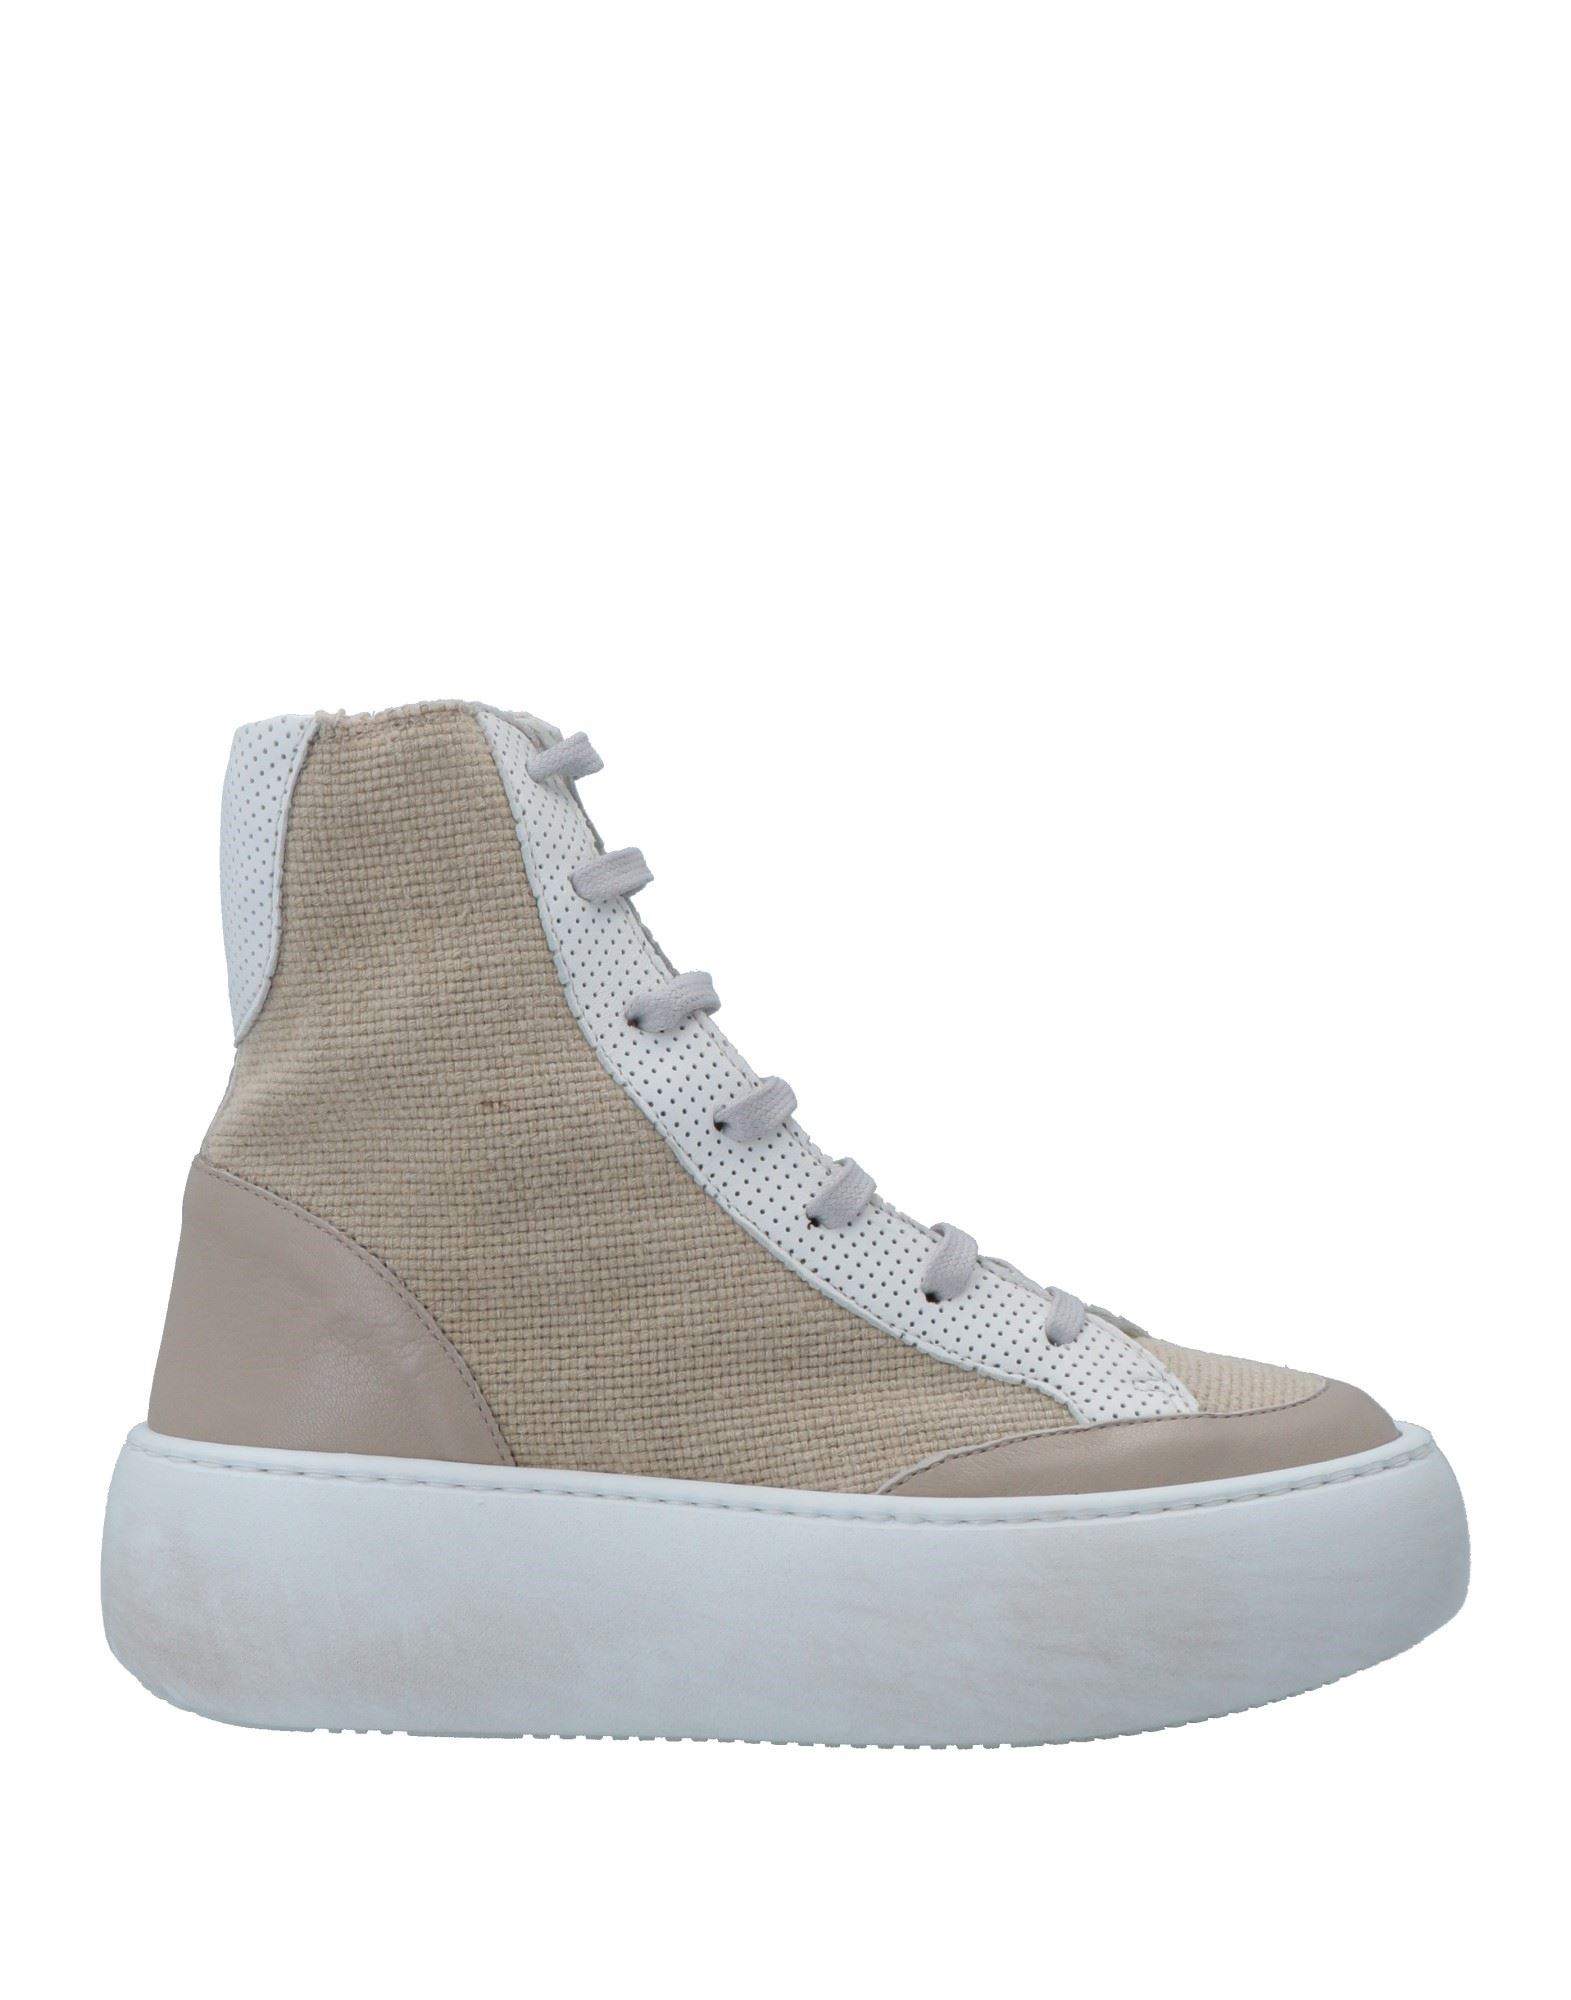 Andìa Fora Sneakers In Beige